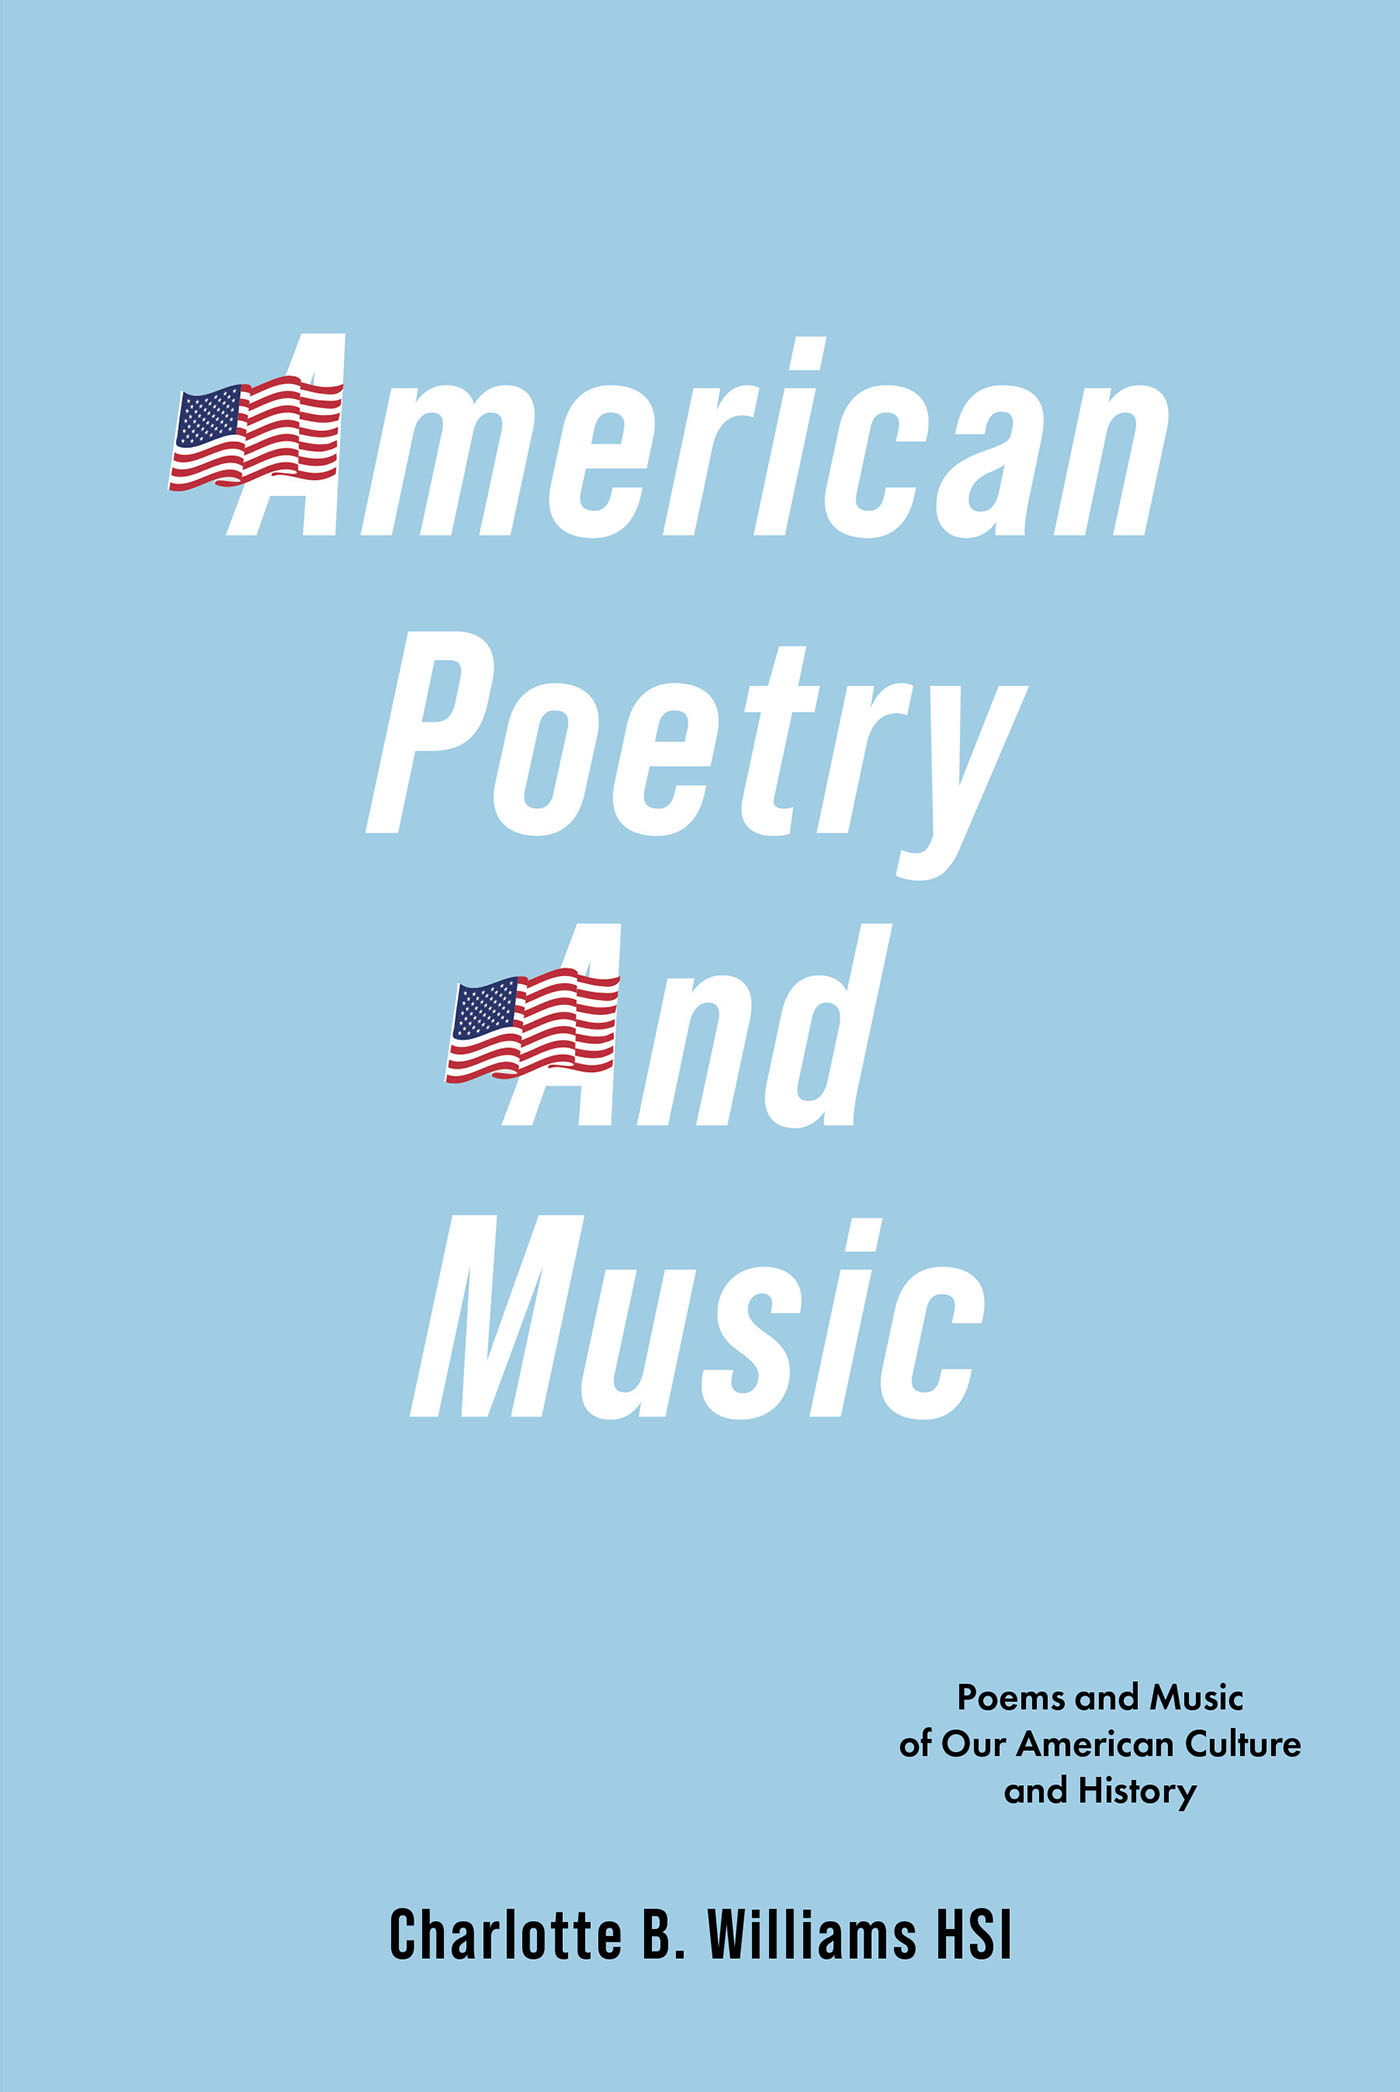 Charlotte B. Williams’ Newly Released “American Poetry And Music: Poems and Music of Our American Culture and History” is an Enjoyable Celebration